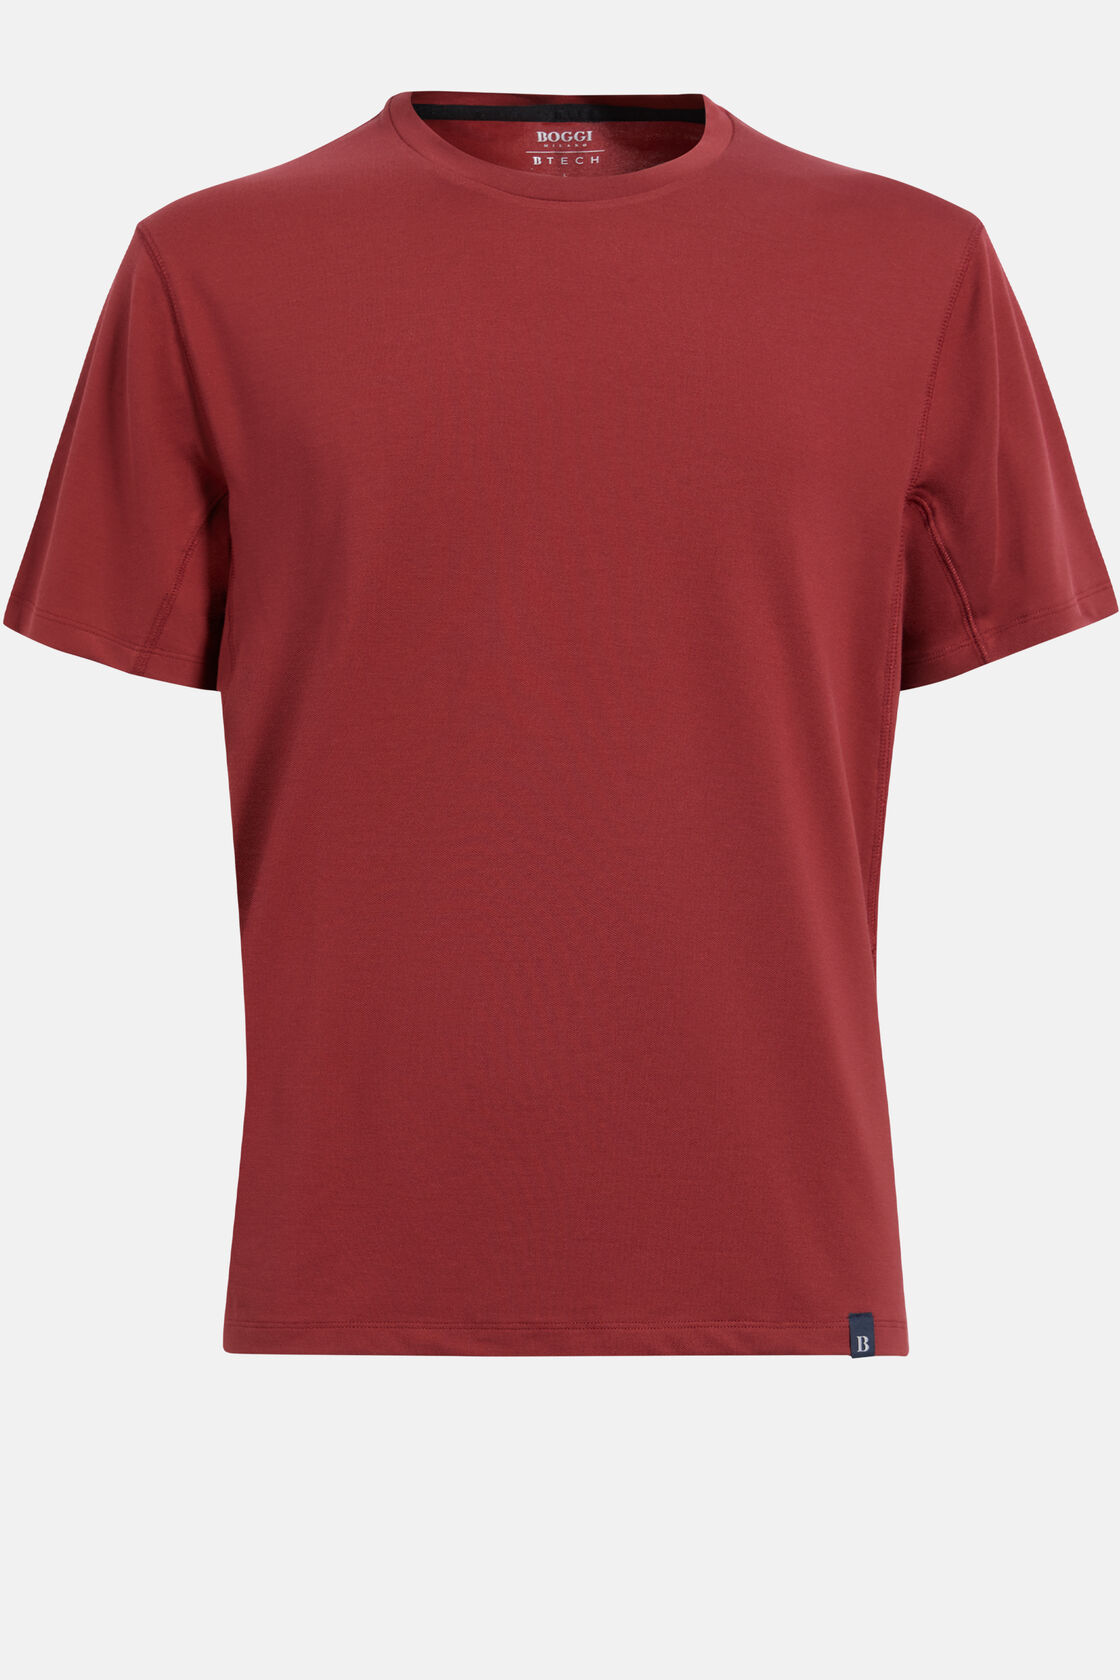 T-Shirt in Sustainable Performance Pique, Red, hi-res